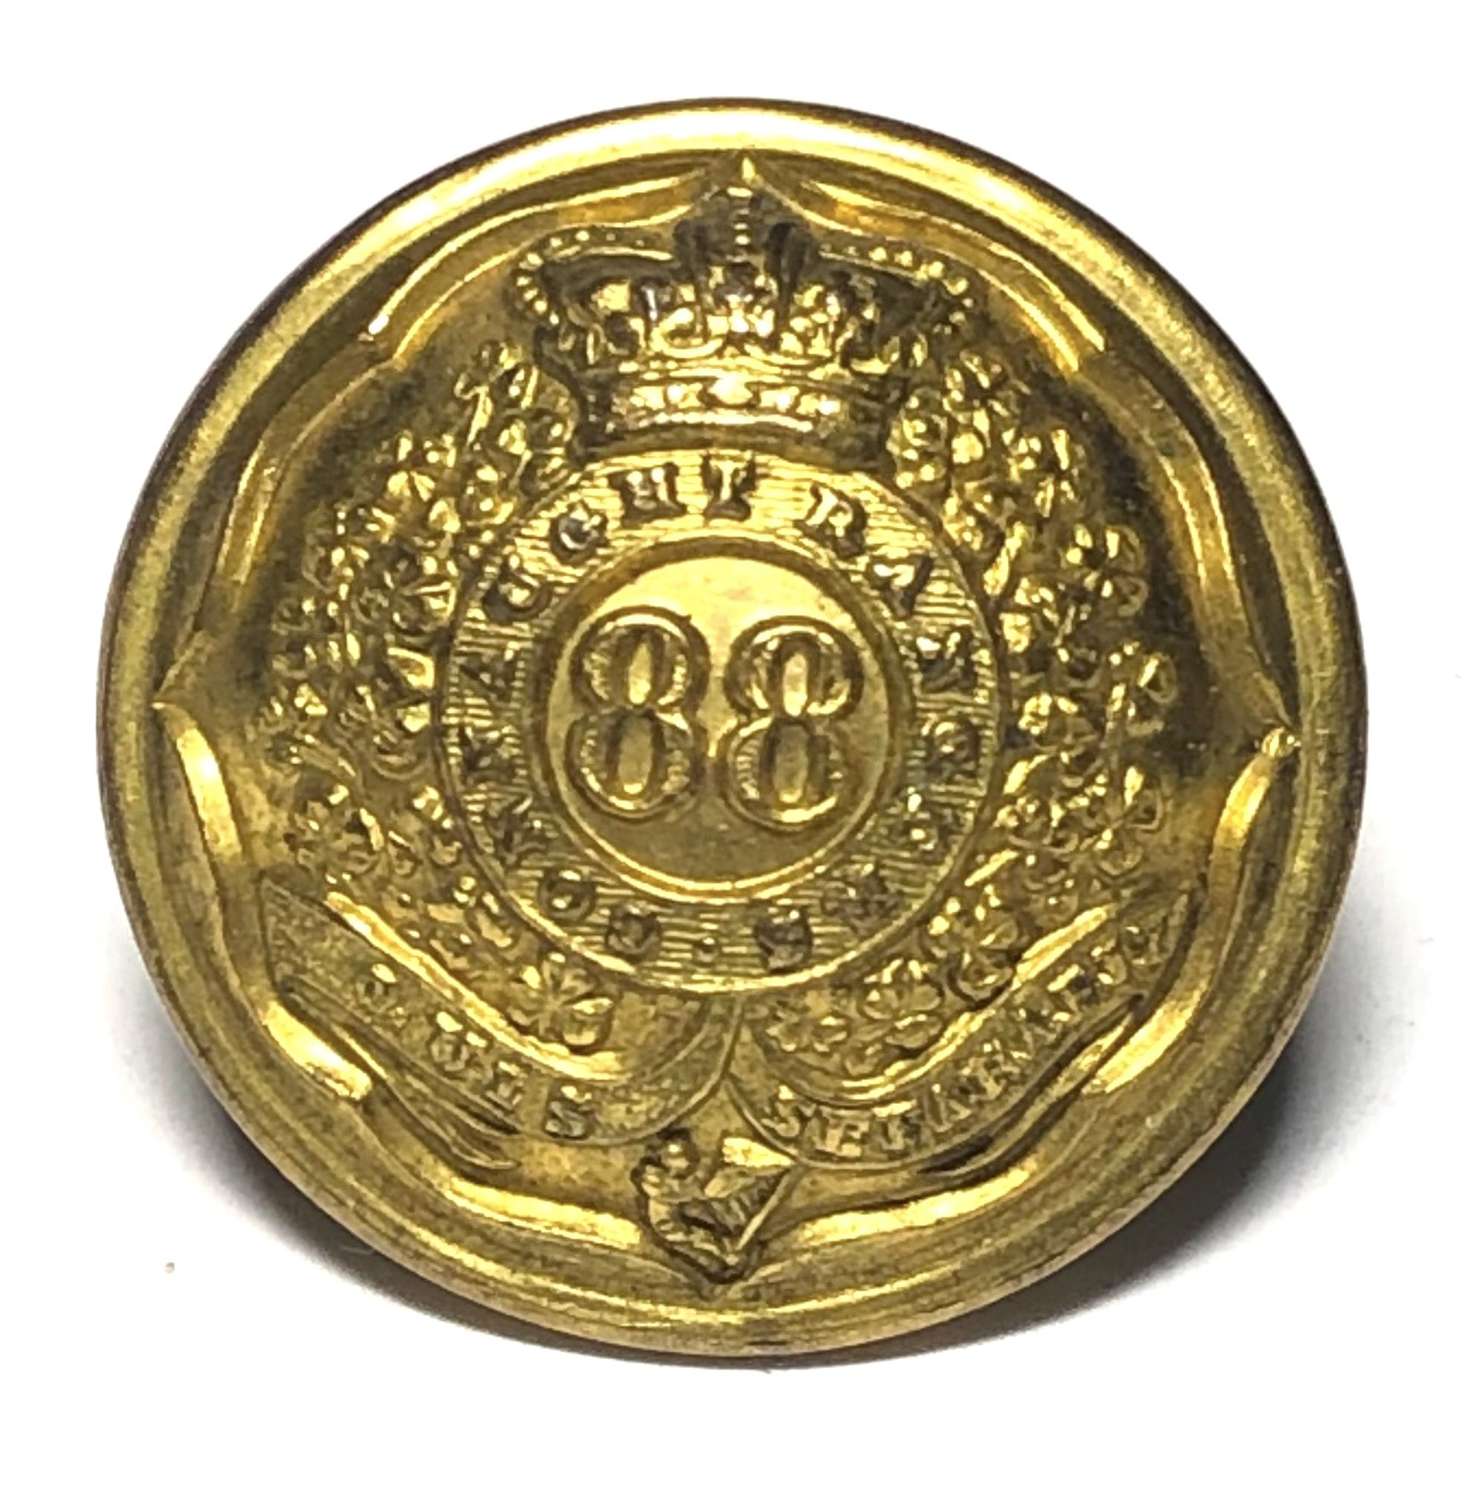 88th Foot (Connaught Rangers) Victorian Officer’s button circa 1860-81